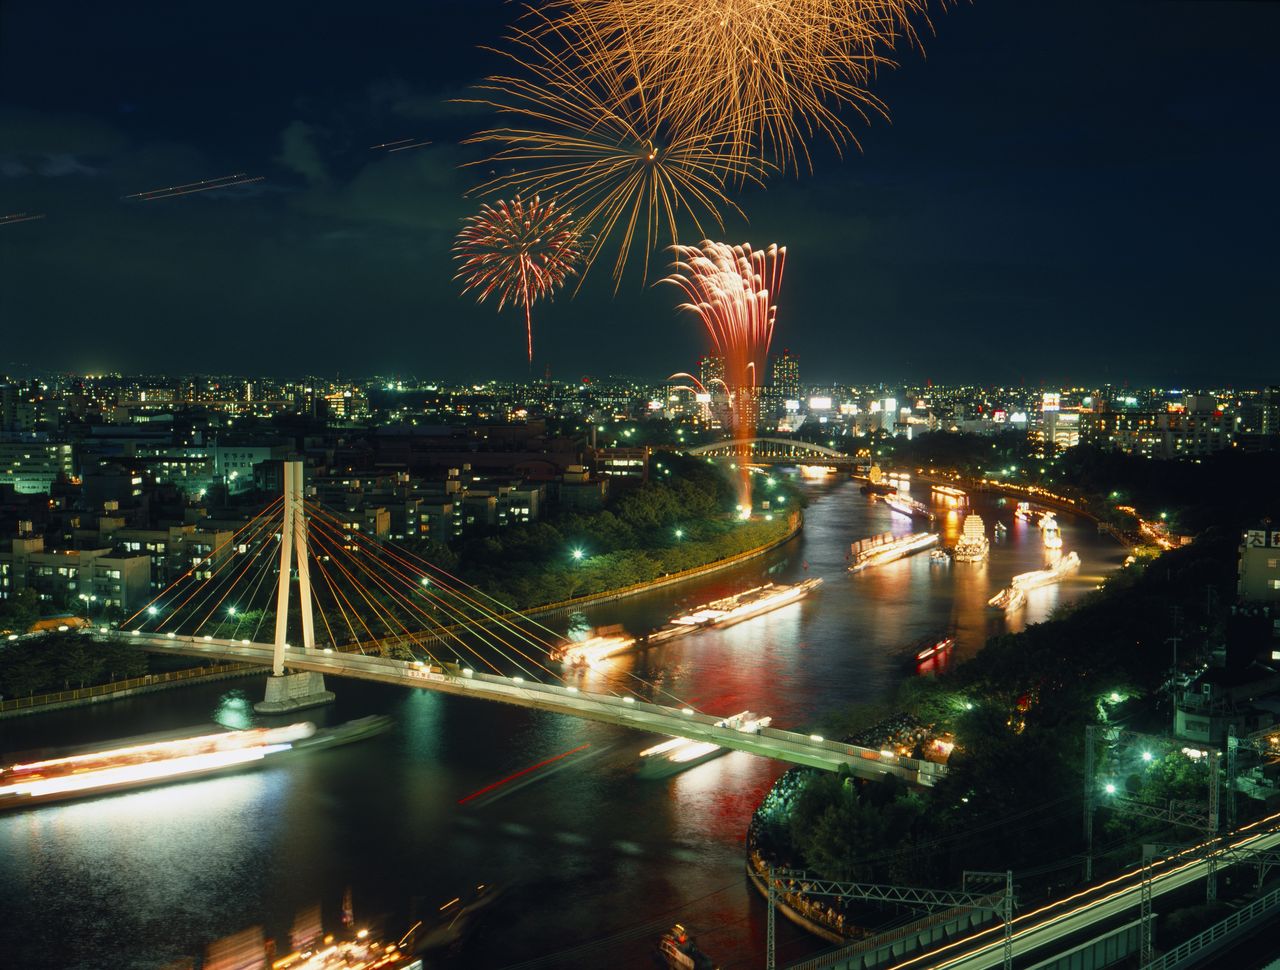 Boats, each illuminated by a bonfire, and the fireworks display along the river. (© Haga Library)